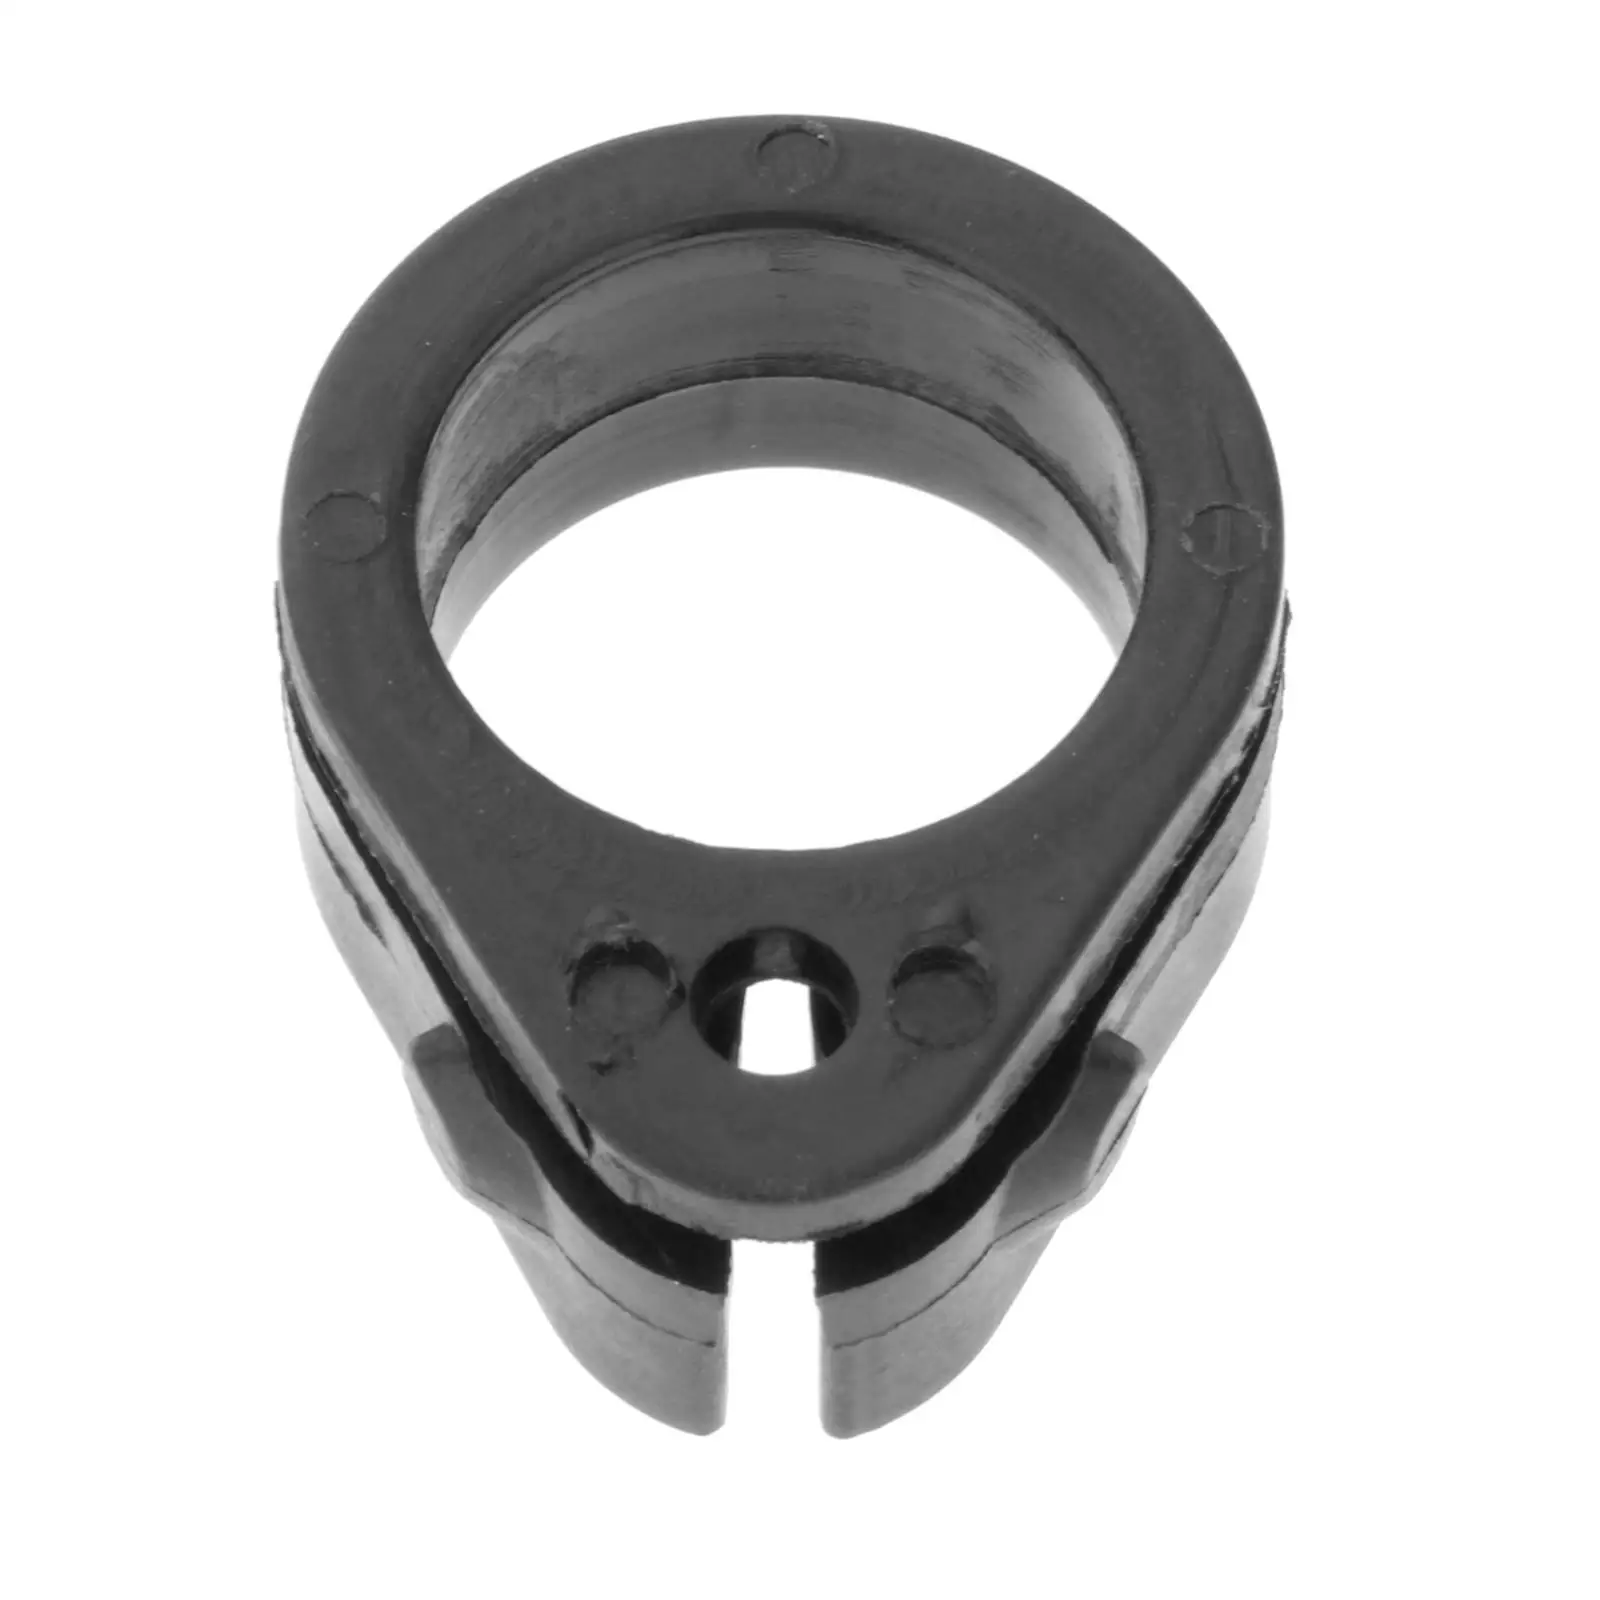 Gearshift Boot Bracket 682-441 for Outboard 9.15HP Mariner 9.9C 15C ,Durable Direct Replaces, High Performance